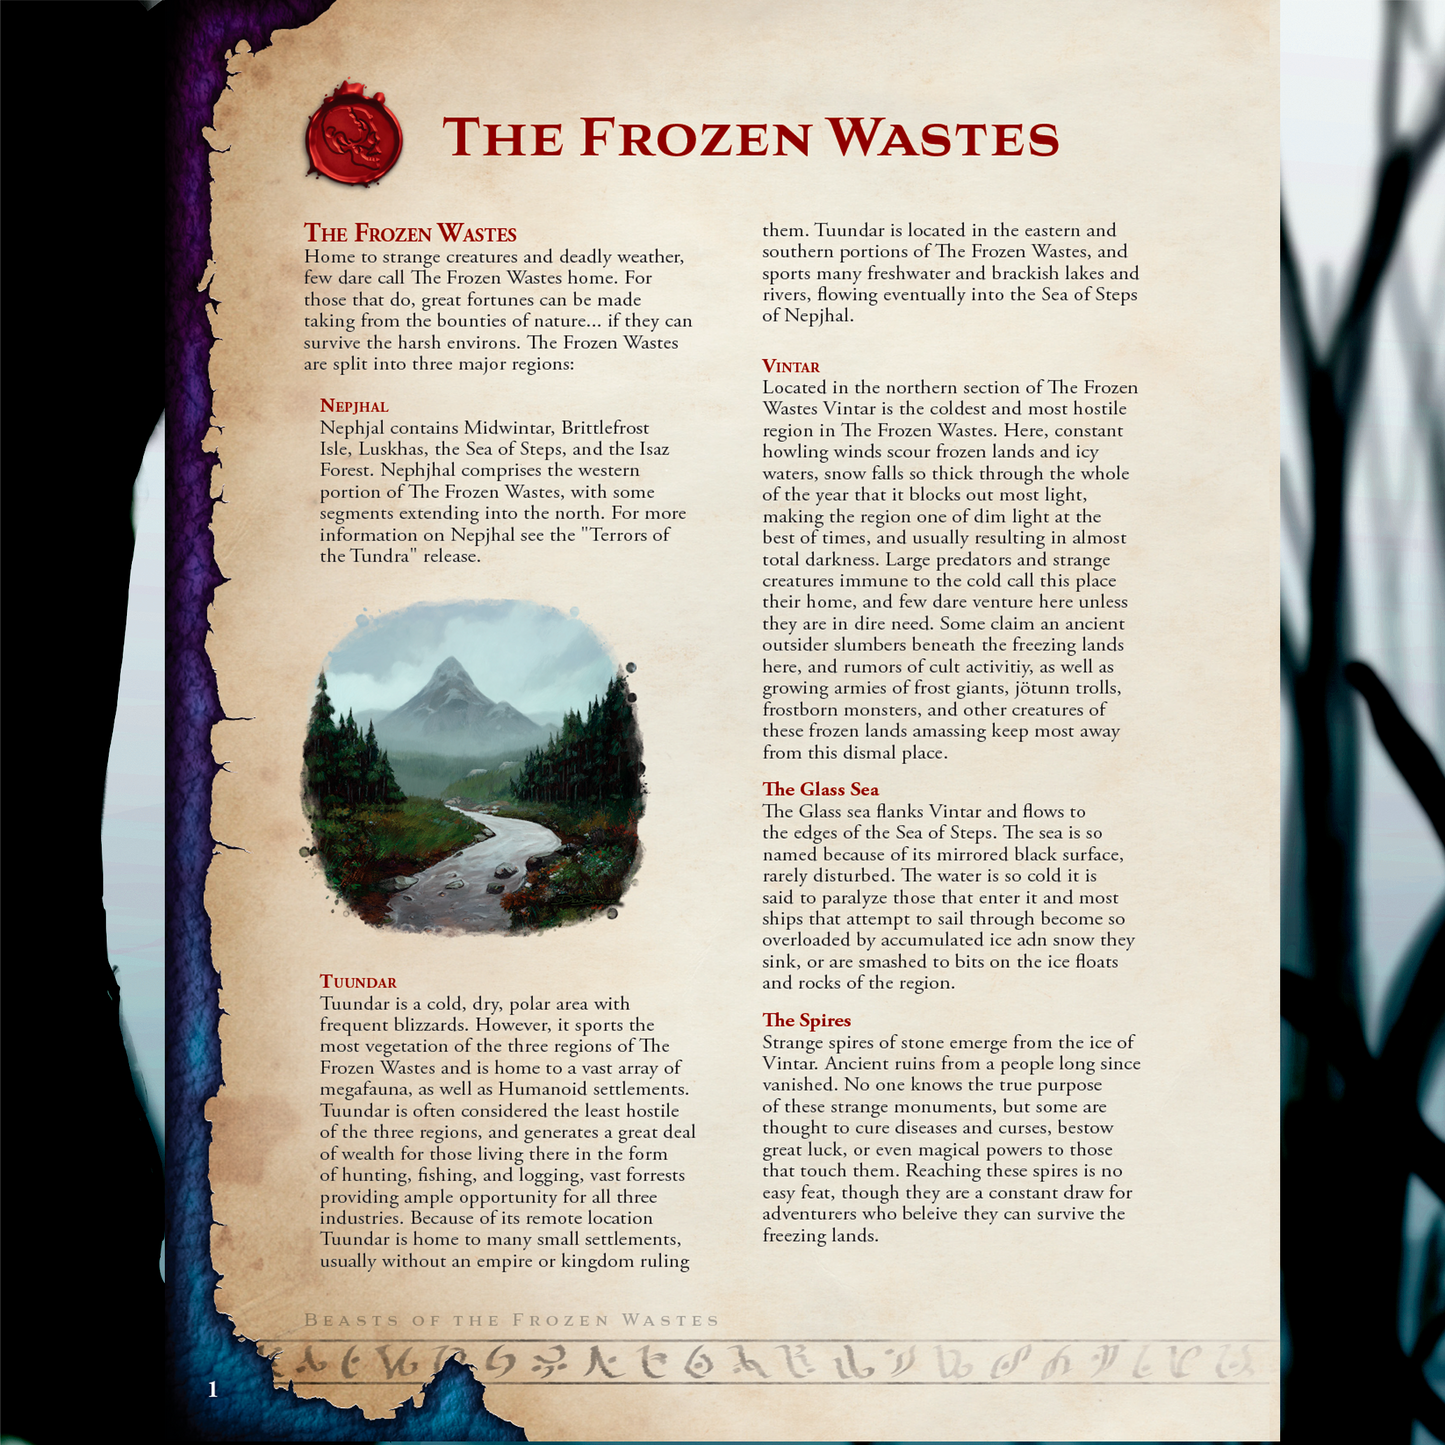 Beasts of the Frozen Wastes PDF